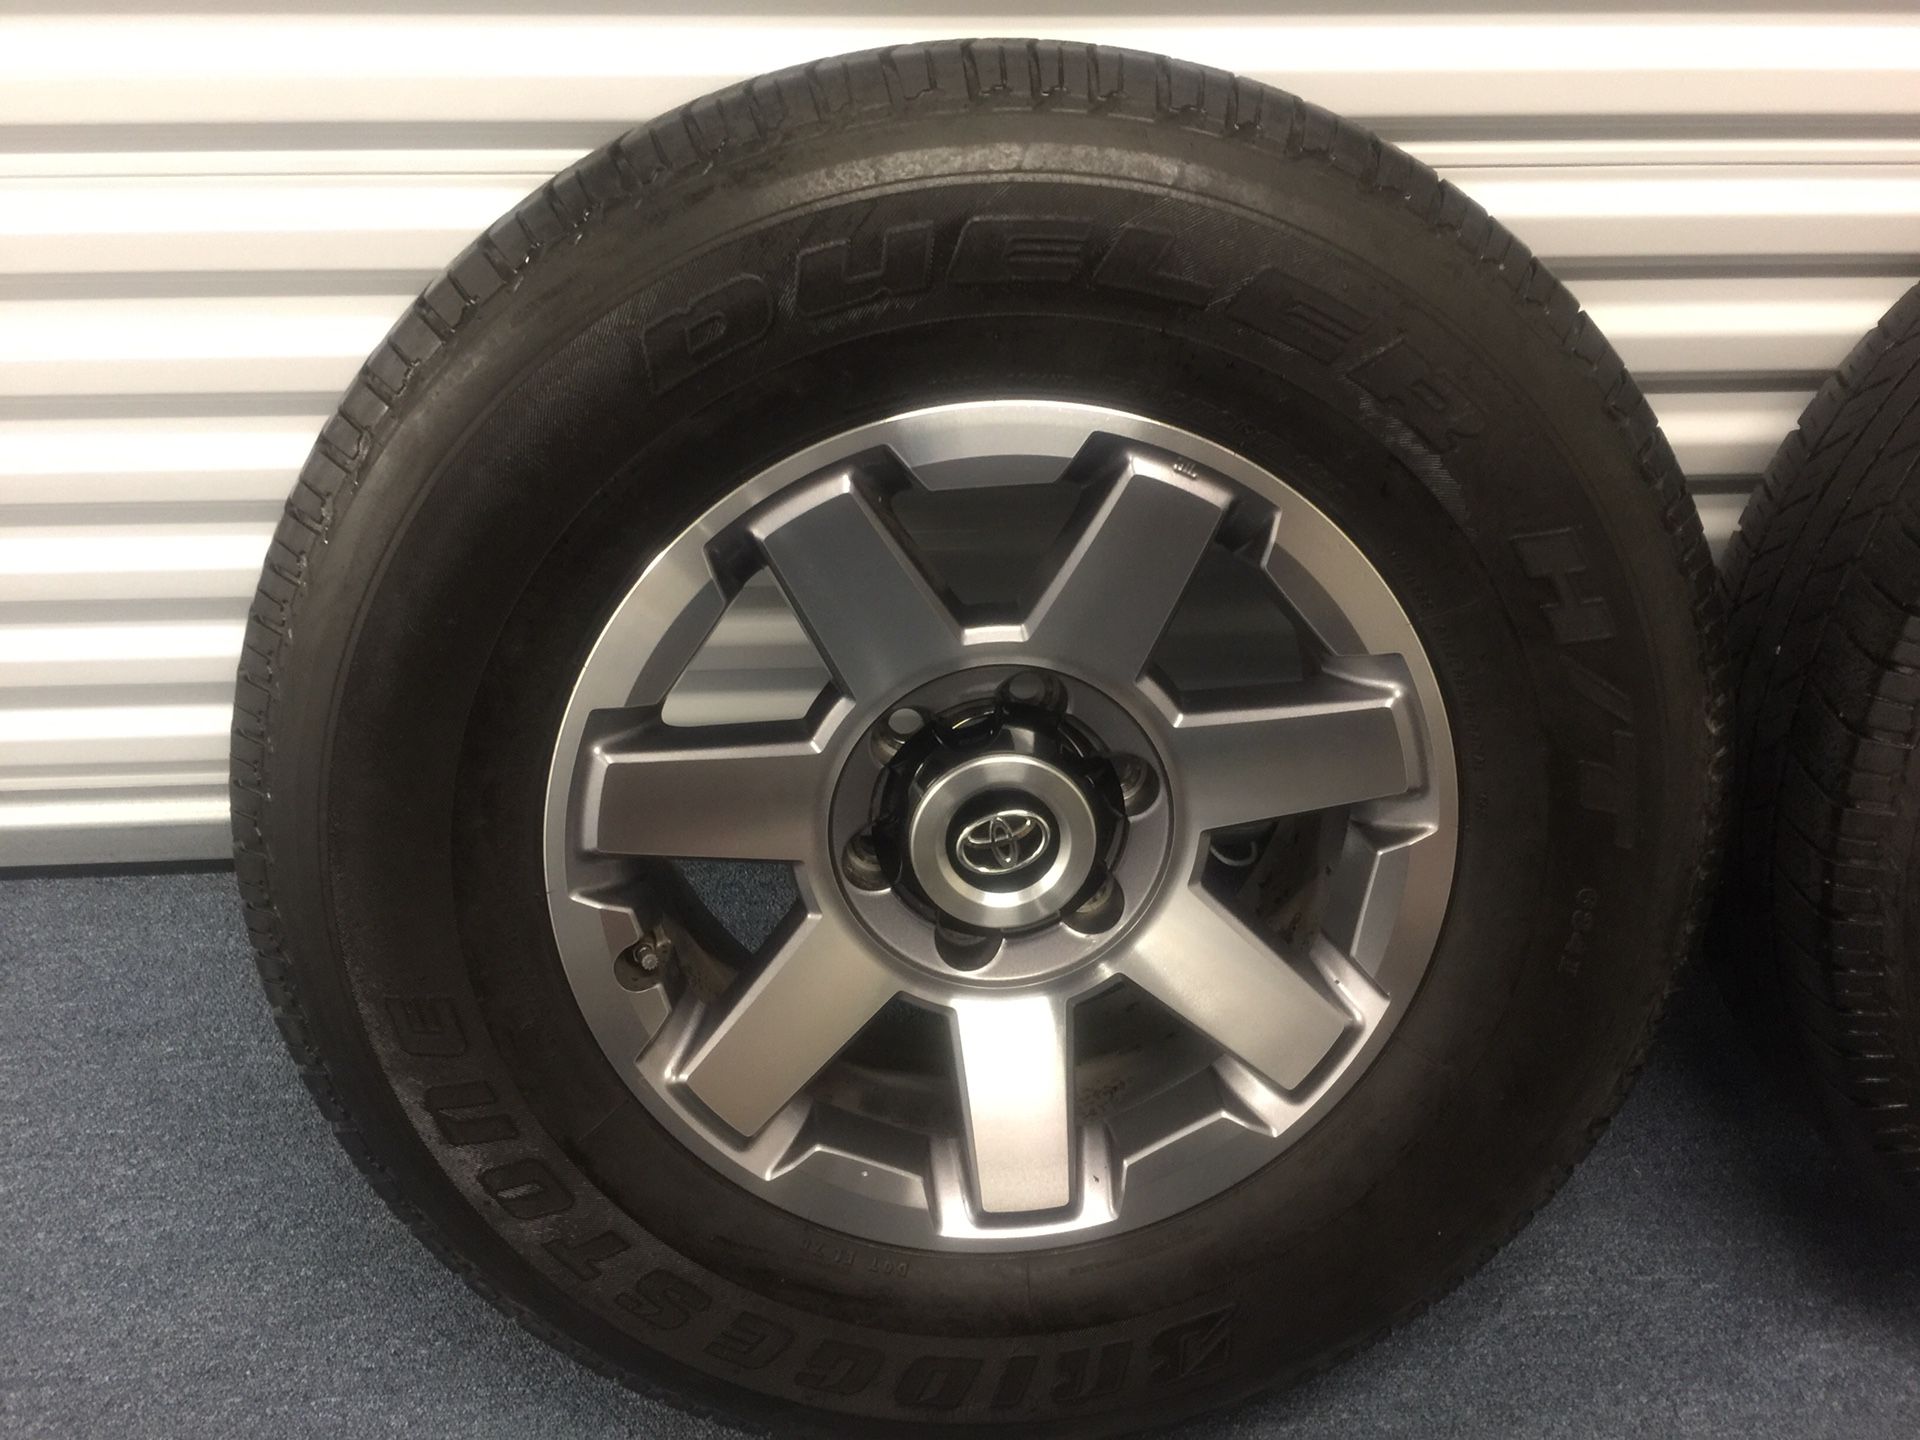 Toyota 2016 4Runner trail set (4) of size 17 tires & rims with tire pressure sensors & spare